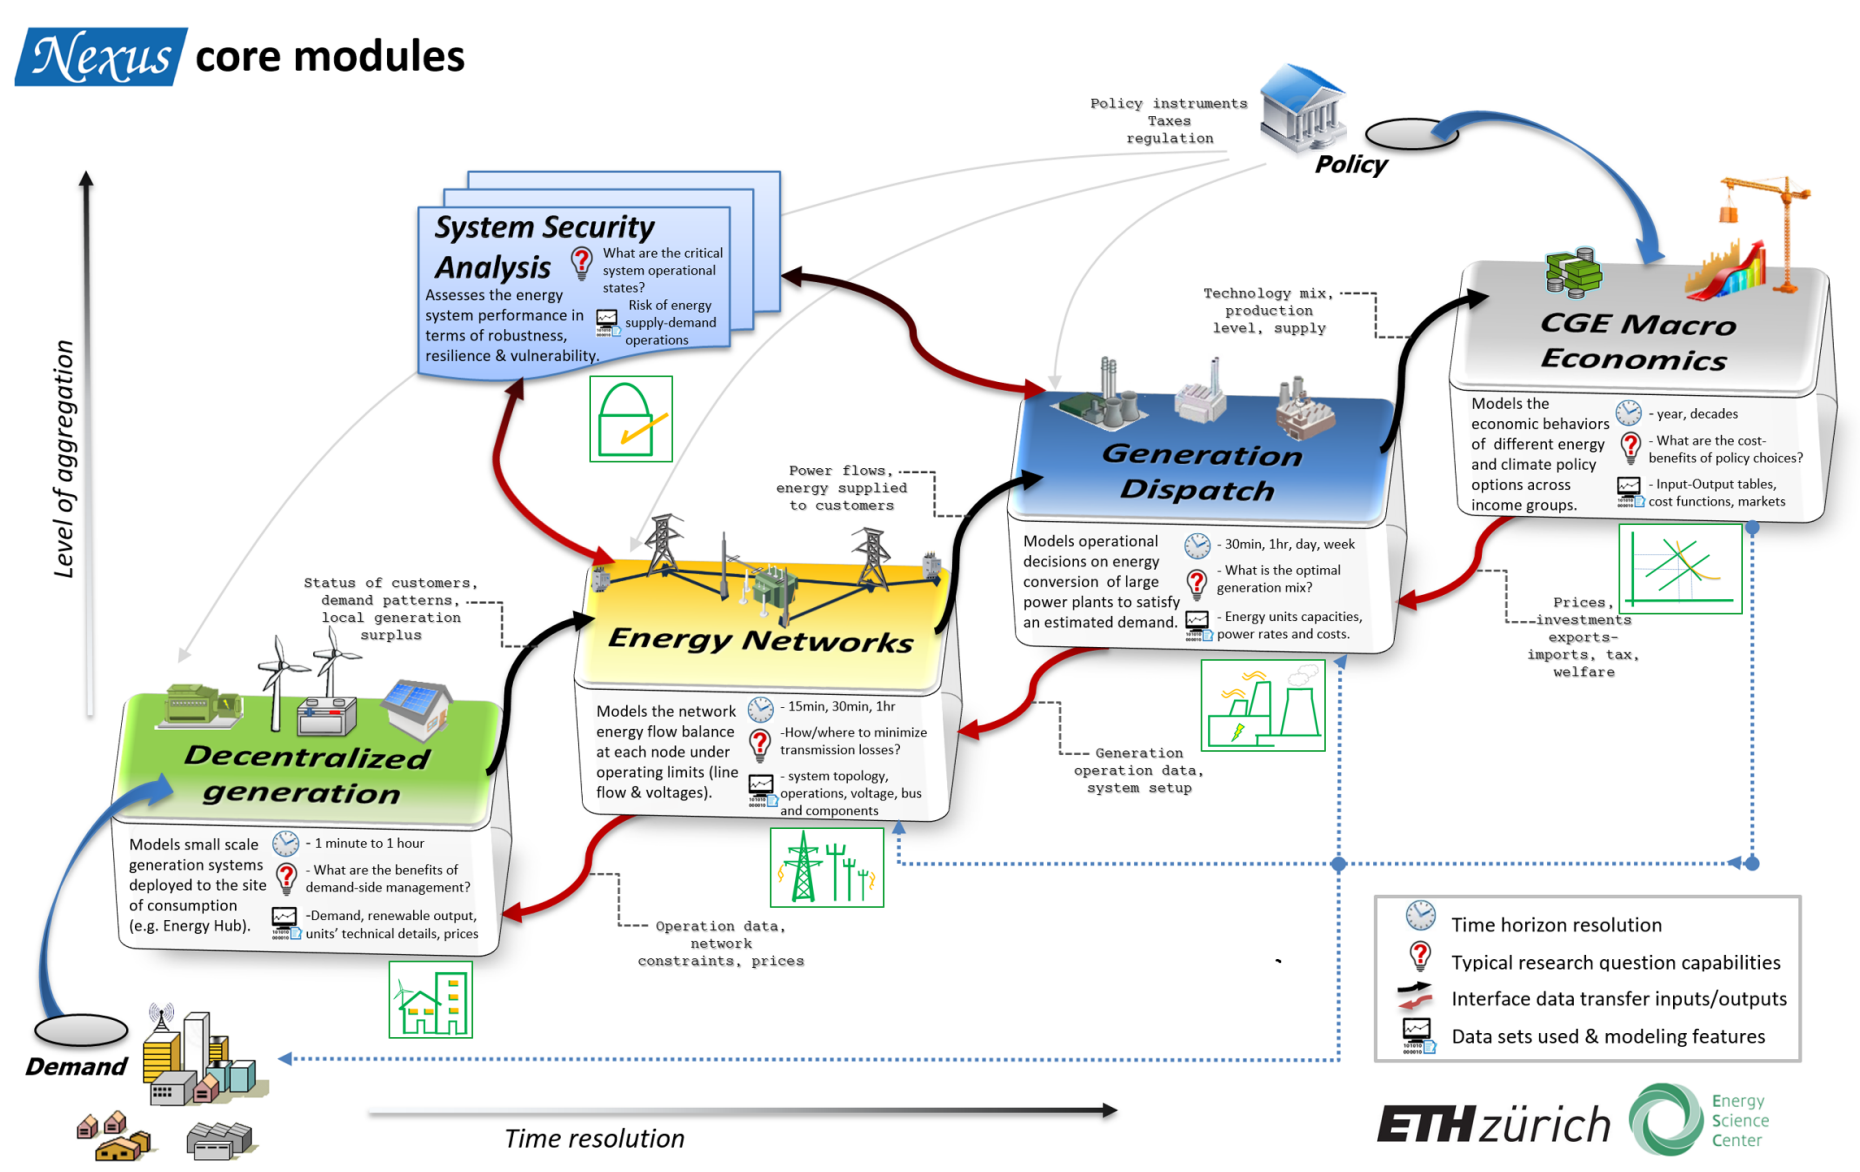 Enlarged view: This mindmap shows the Nexus Energy System Model: core modules and interfaces representing the central structure of the energy system: Decentralized generation, energy networks and generaton dispatch linked to systems security analysis, CGE macro economics and policy instruments  with taxes regulation, showing the mutual influences of large-scale centralized and small-scale, decentralized flexibility providers in light of a transition of the energy sector.